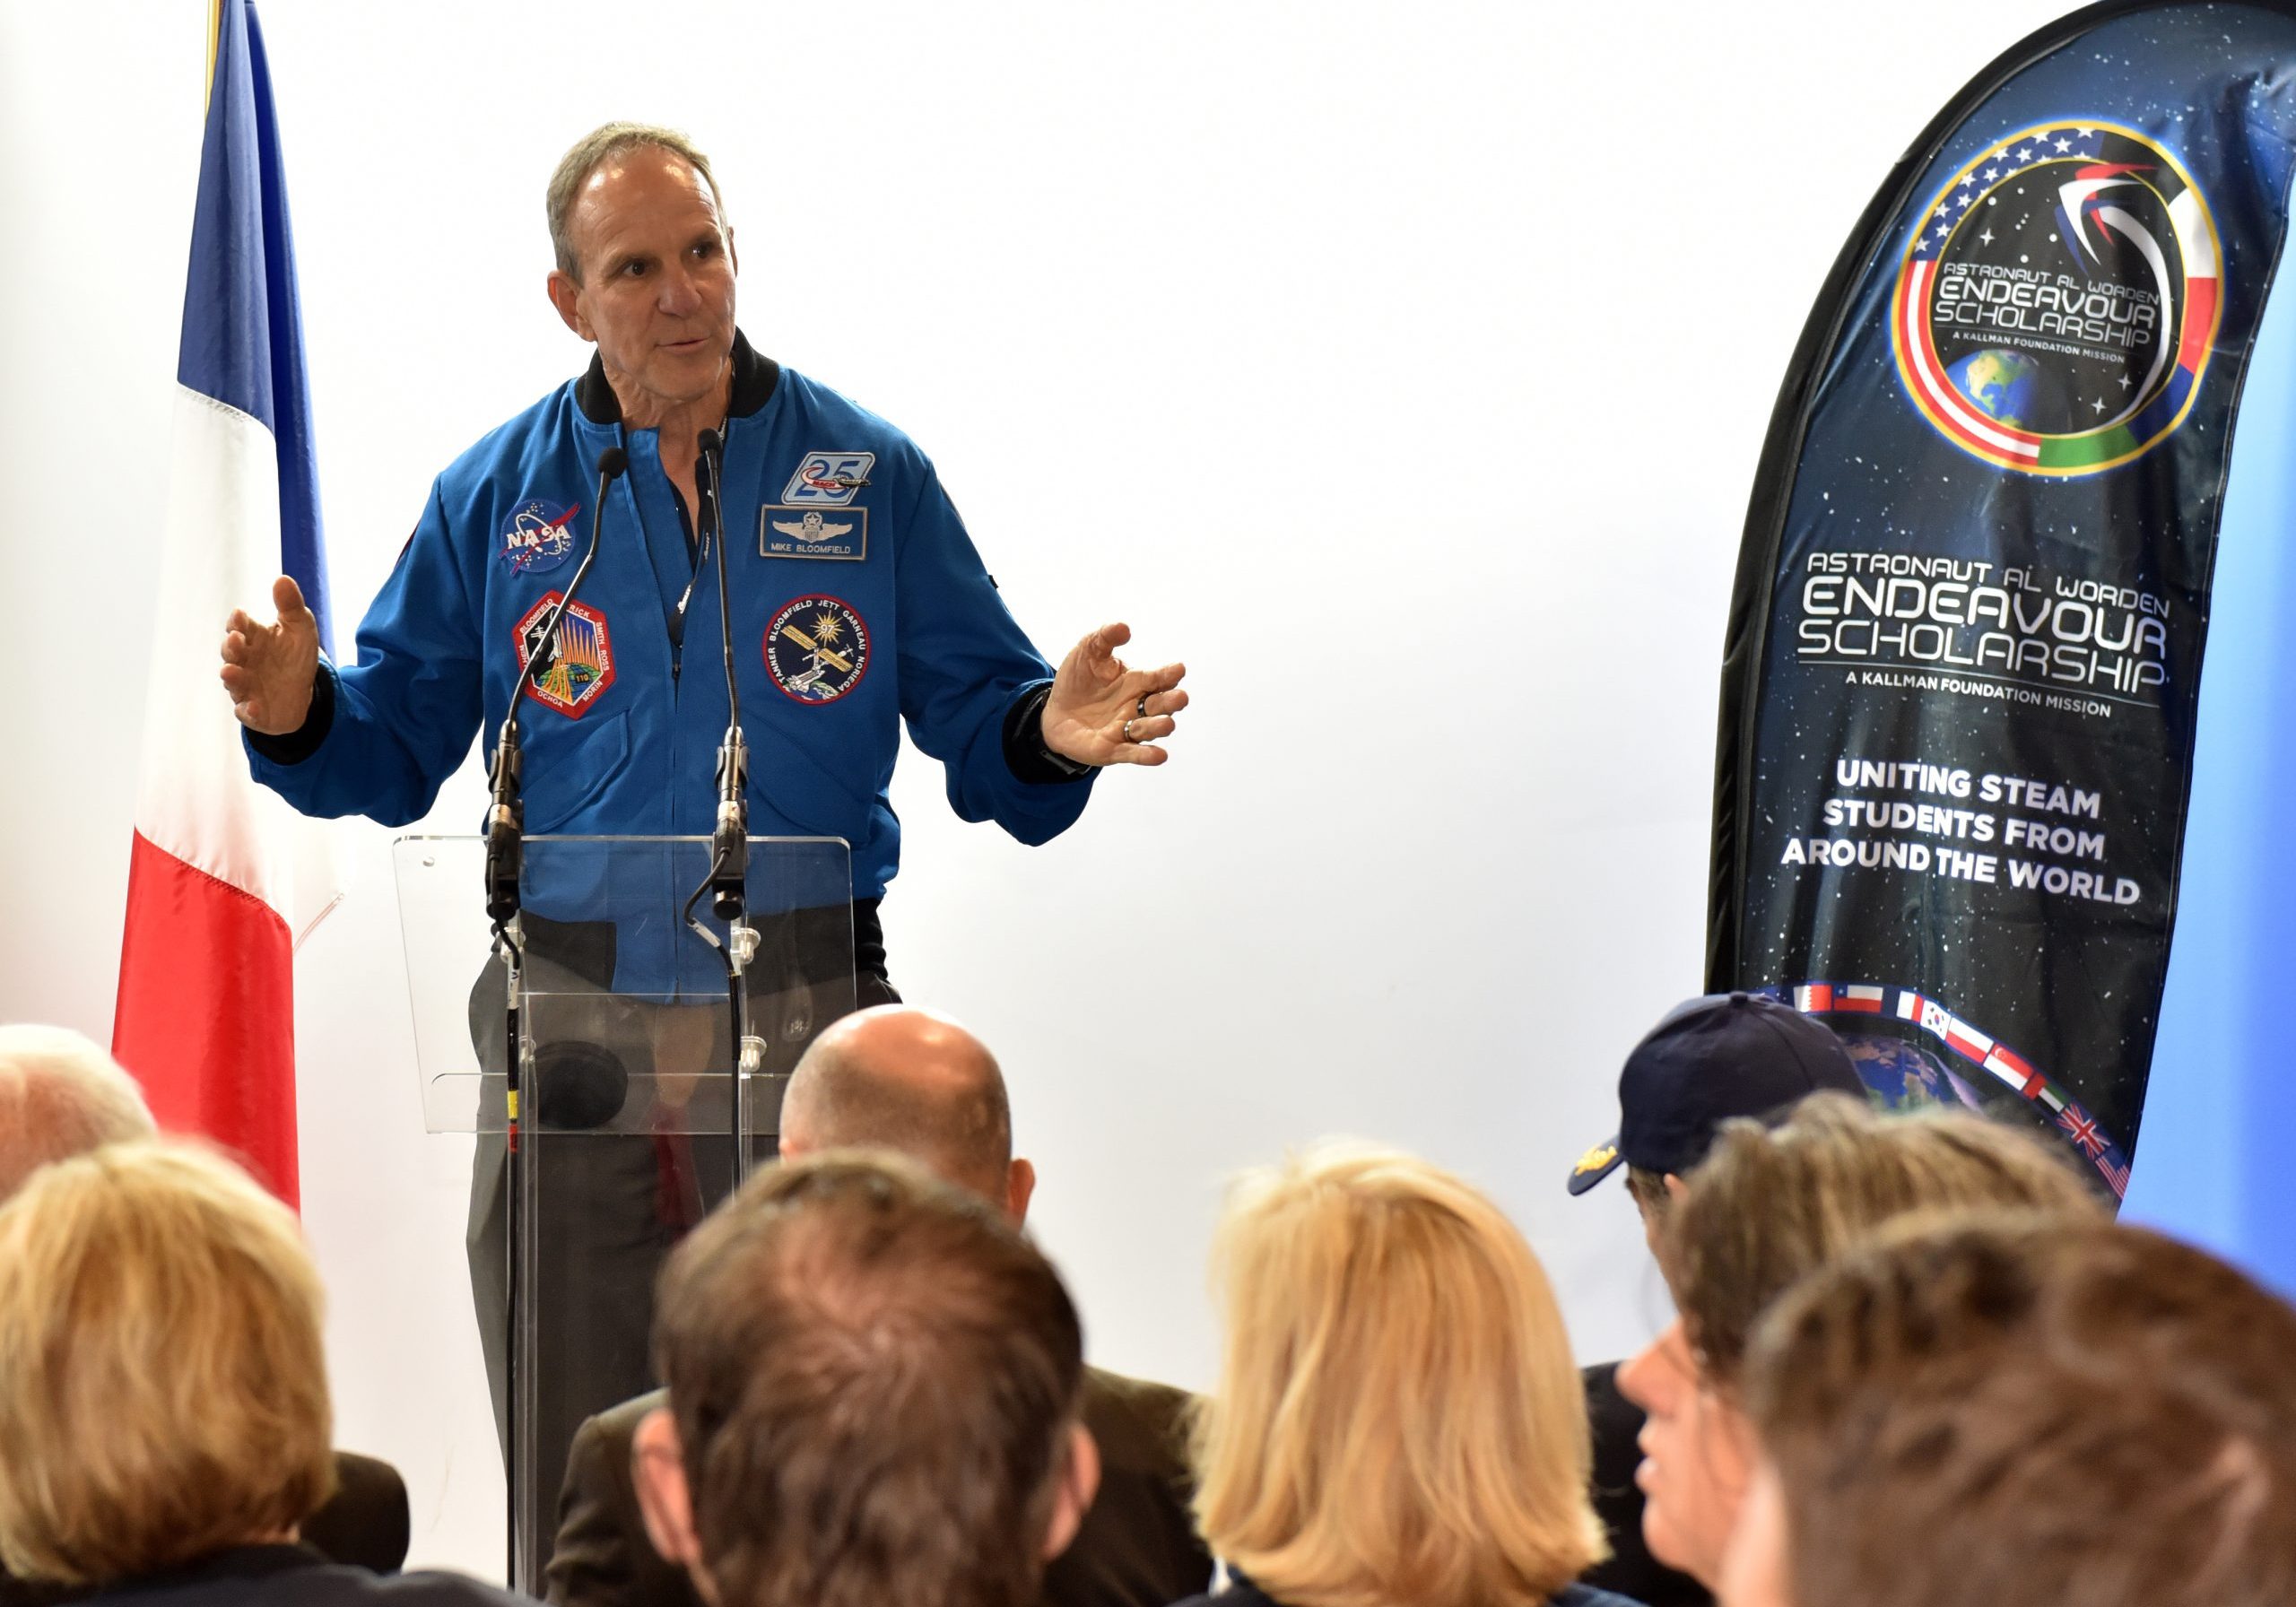 Former NASA astronaut, Mike Bloomfield, works with the Kallman Foundation as a goodwill ambassador for the future workforce and the Endeavour Scholarship program. 